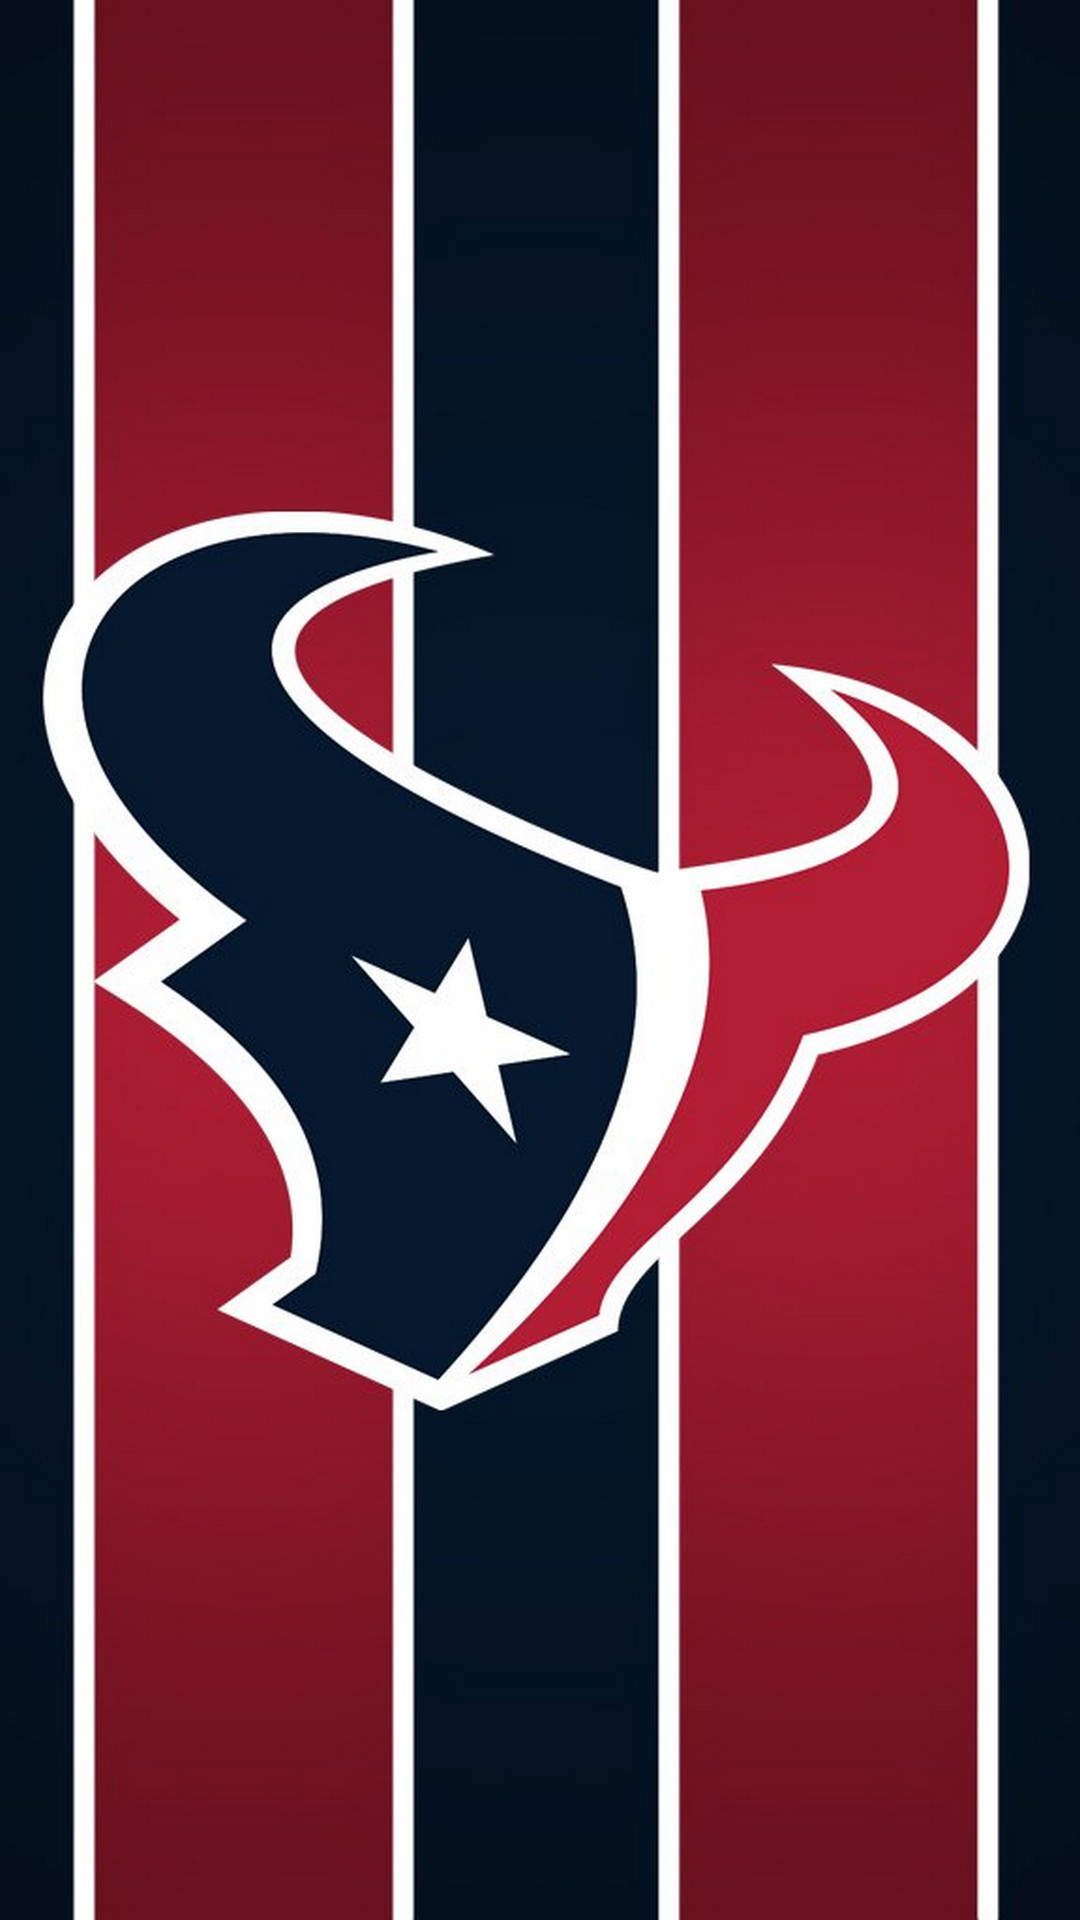 Houston Texans iPhone Wallpaper High Quality with high-resolution 1080x1920 pixel. Donwload and set as wallpaper for your iPhone X, iPhone XS home screen backgrounds, XS Max, XR, iPhone8 lock screen wallpaper, iPhone 7, 6, SE and other mobile devices